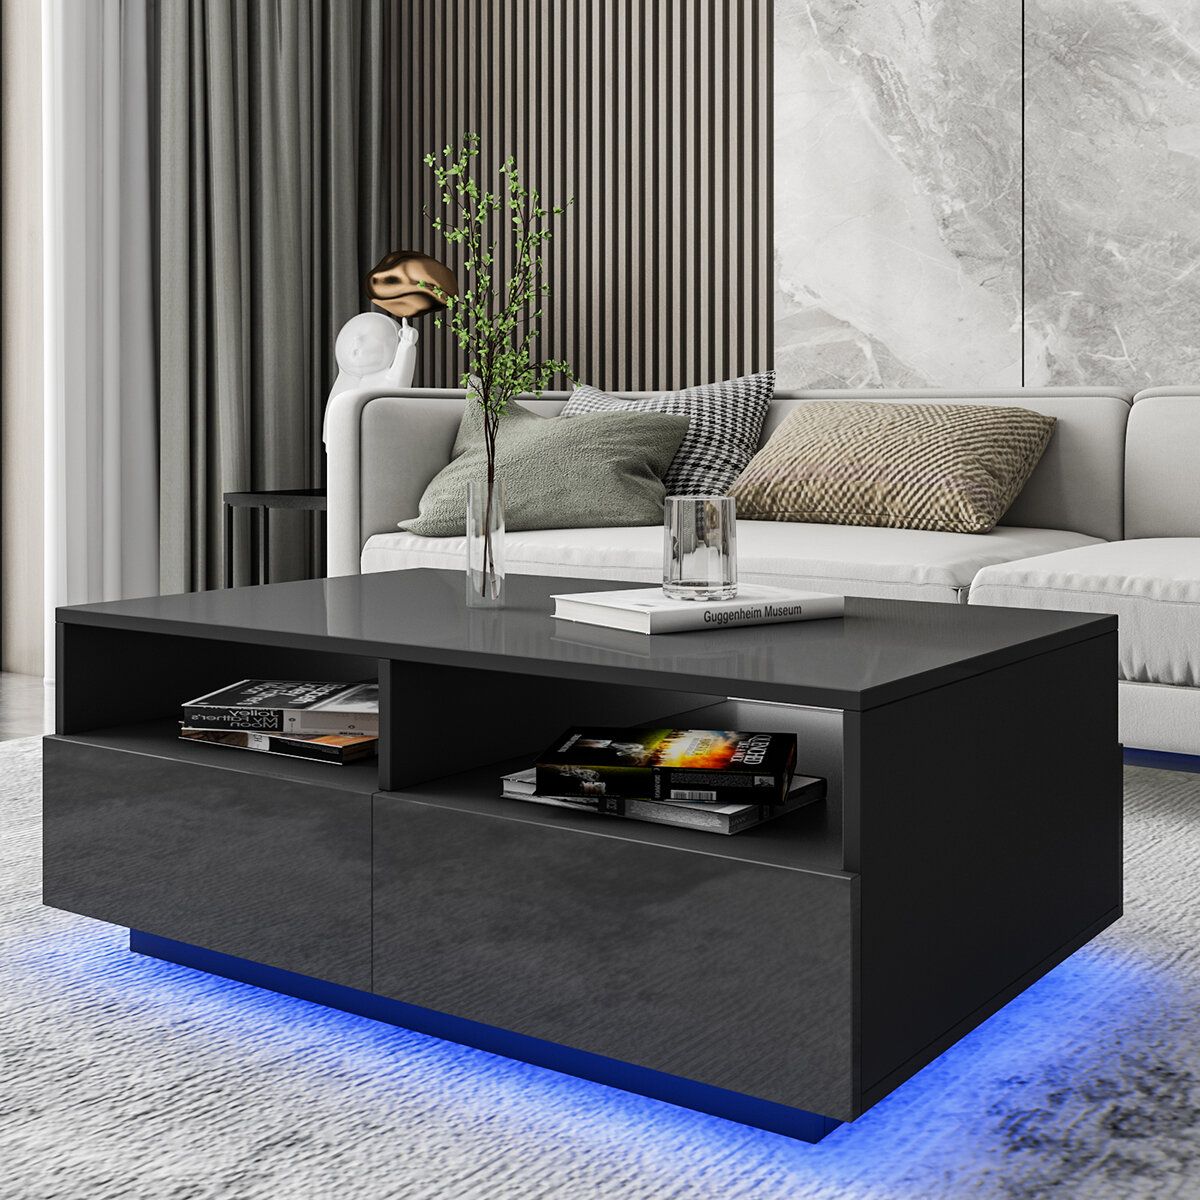 Ivy Bronx Gastelum Led Coffee Table With Colorful Rgb Led Lights & 4 Drawers  & Reviews | Wayfair With Regard To Led Coffee Tables With 4 Drawers (View 10 of 15)